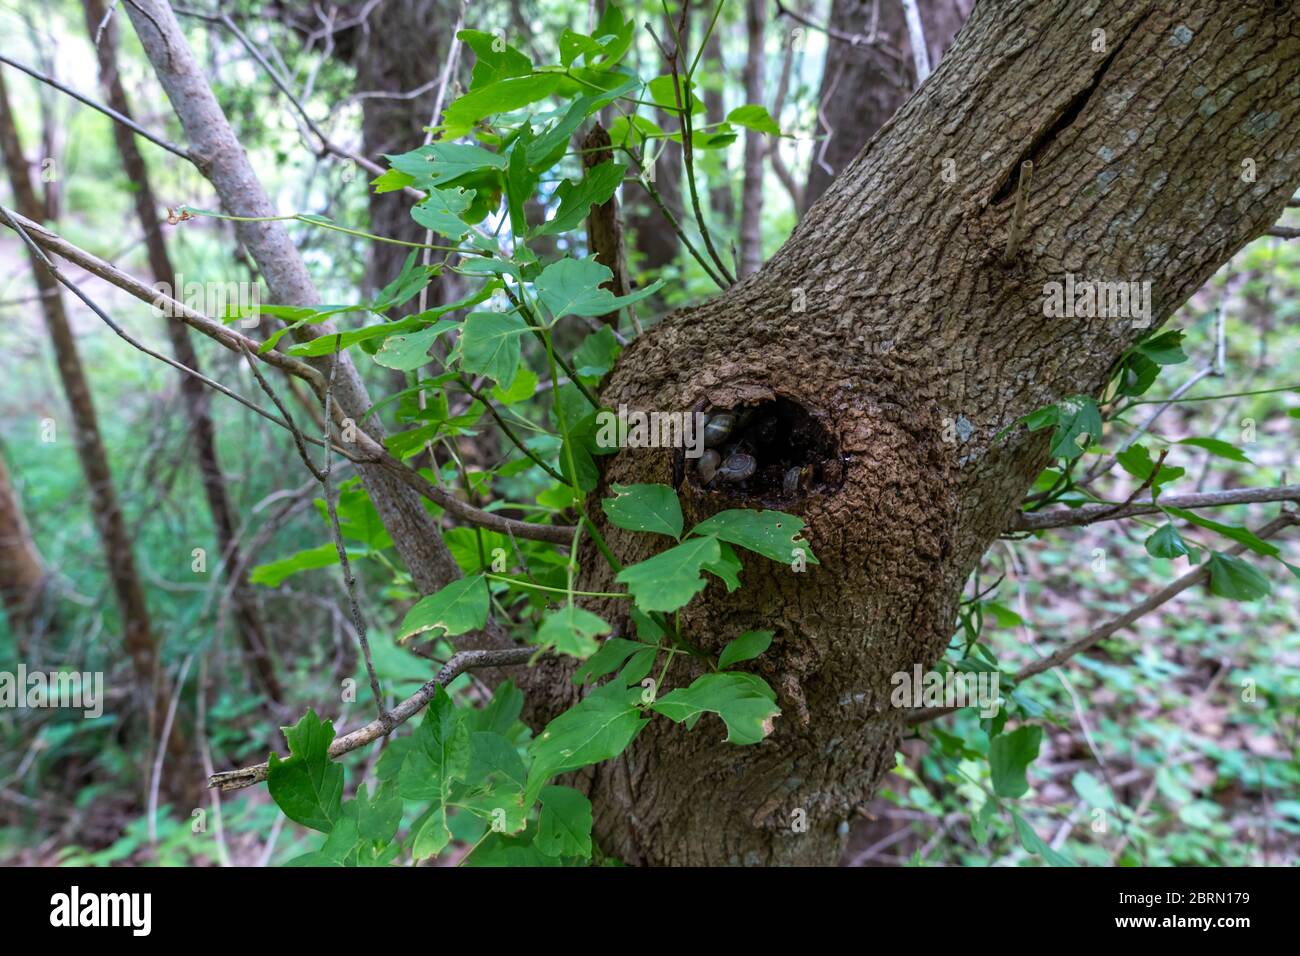 View of Large Tree with Hole Full of Snails During Day Time Stock Photo